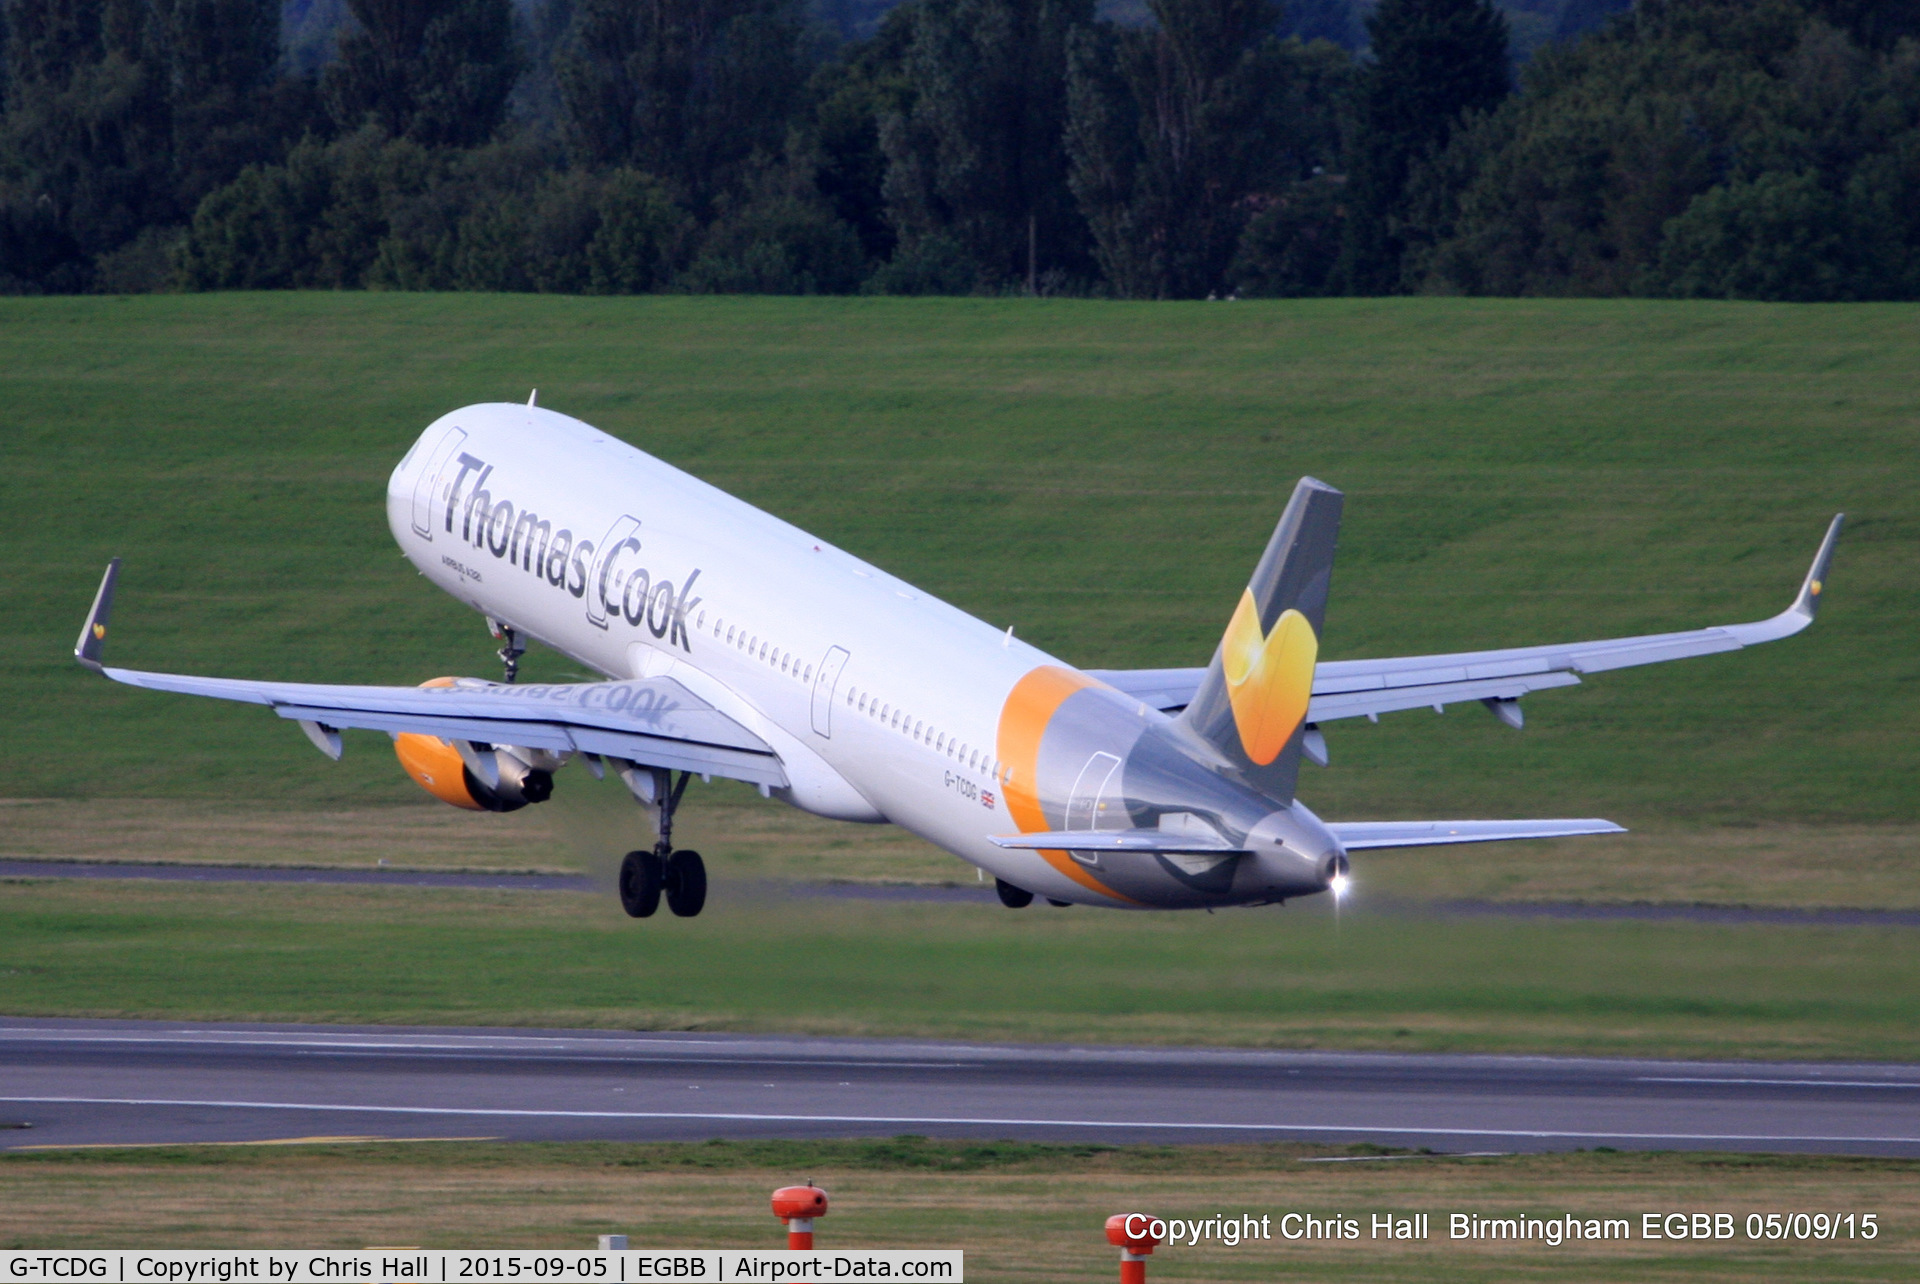 G-TCDG, 2014 Airbus A321-211 C/N 6122, Thomas Cook Airlines